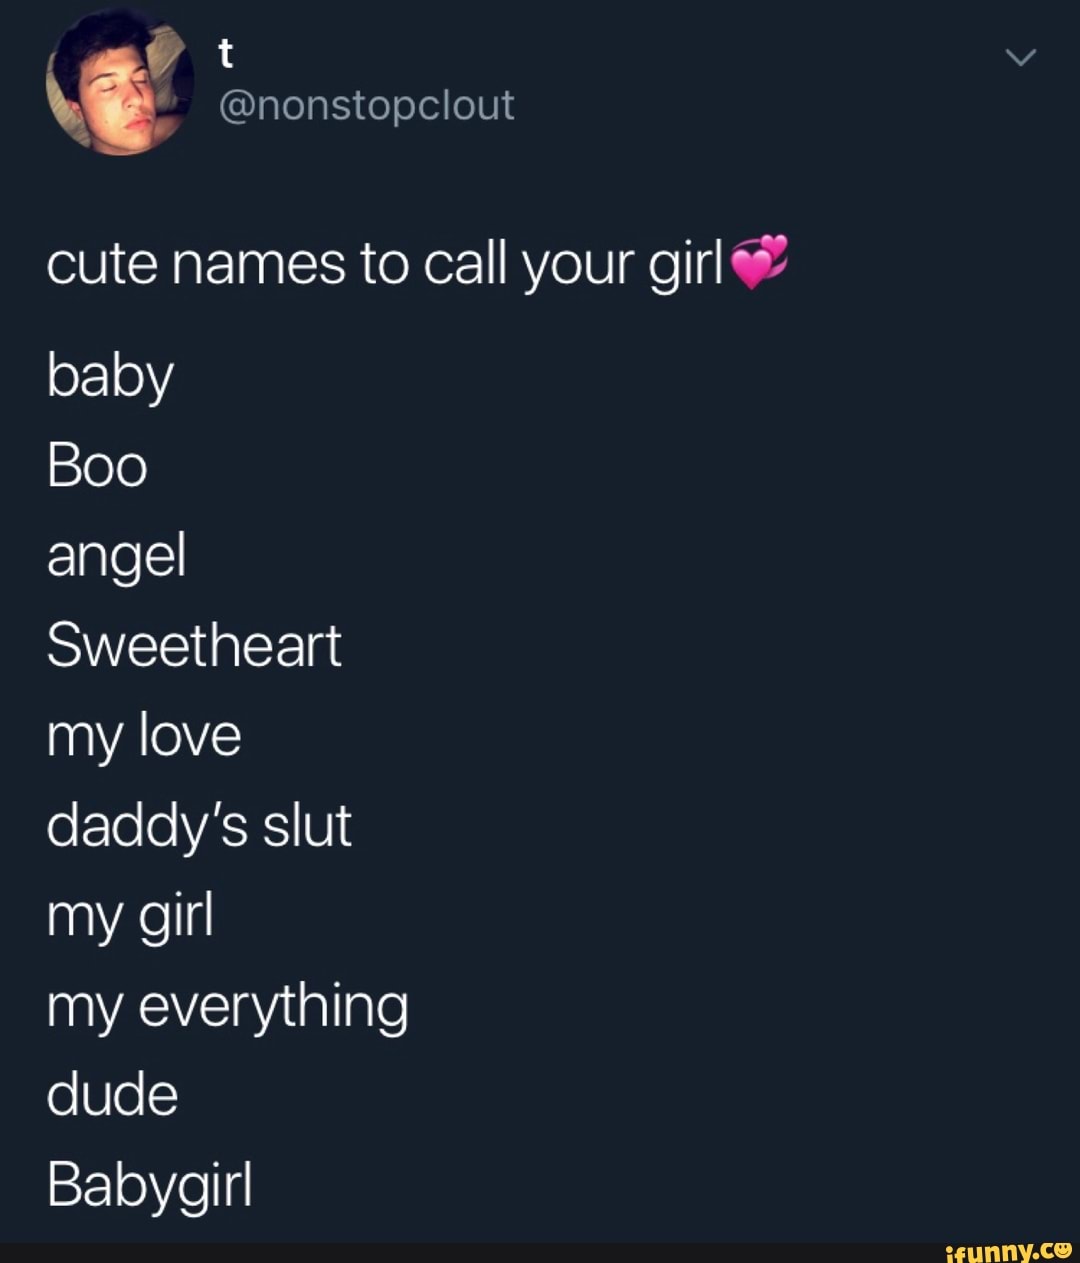 Cute names to call your girl ª. parfait on Twitter. 